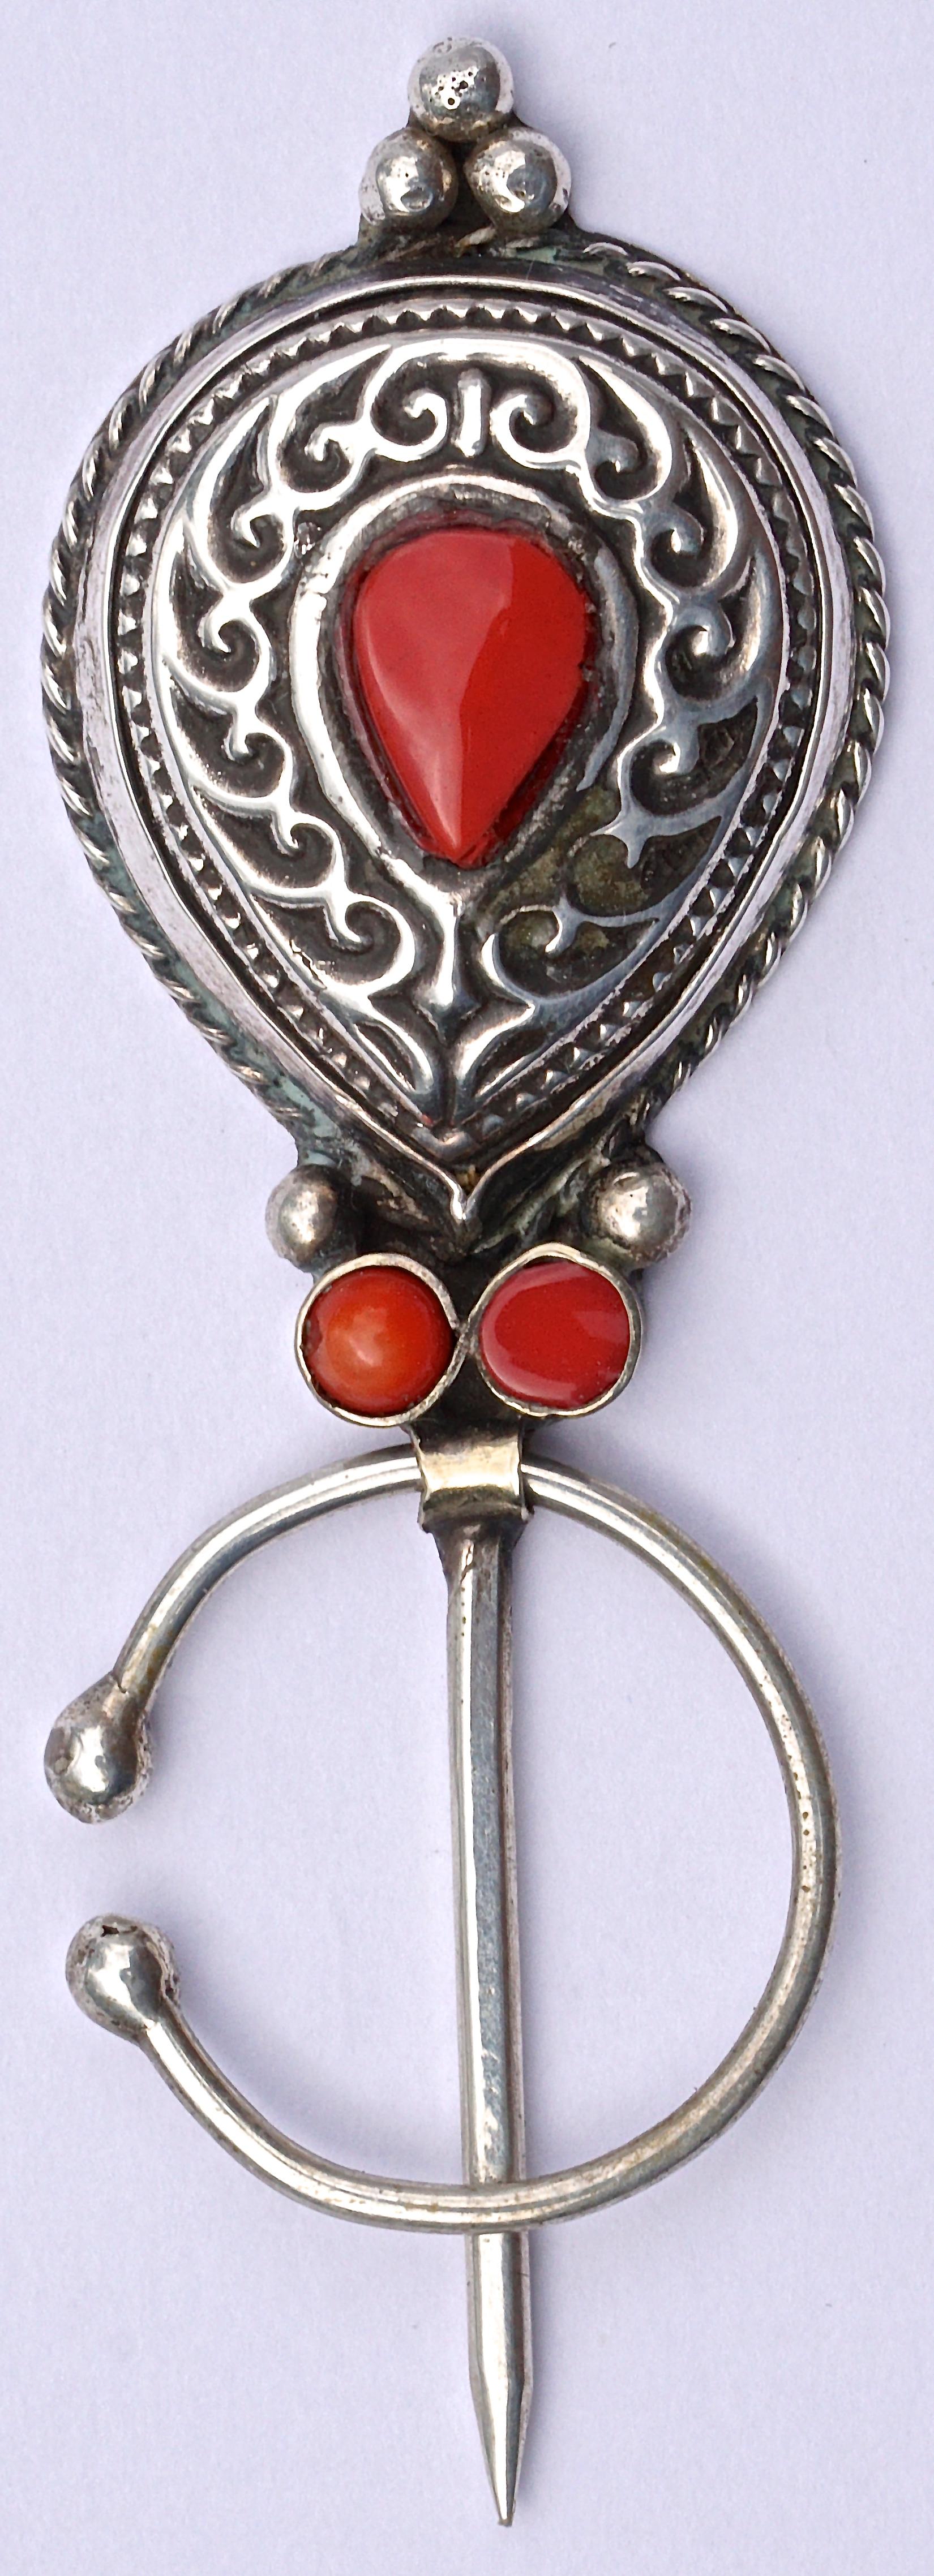 Moroccan silver penannular brooch with glass coral stones, and featuring a swirl design with rope twist edging. It is  handmade by Berbers, an ethnic people indigenous mainly to Morocco and Algeria. The brooch pins to the garment and is then locked